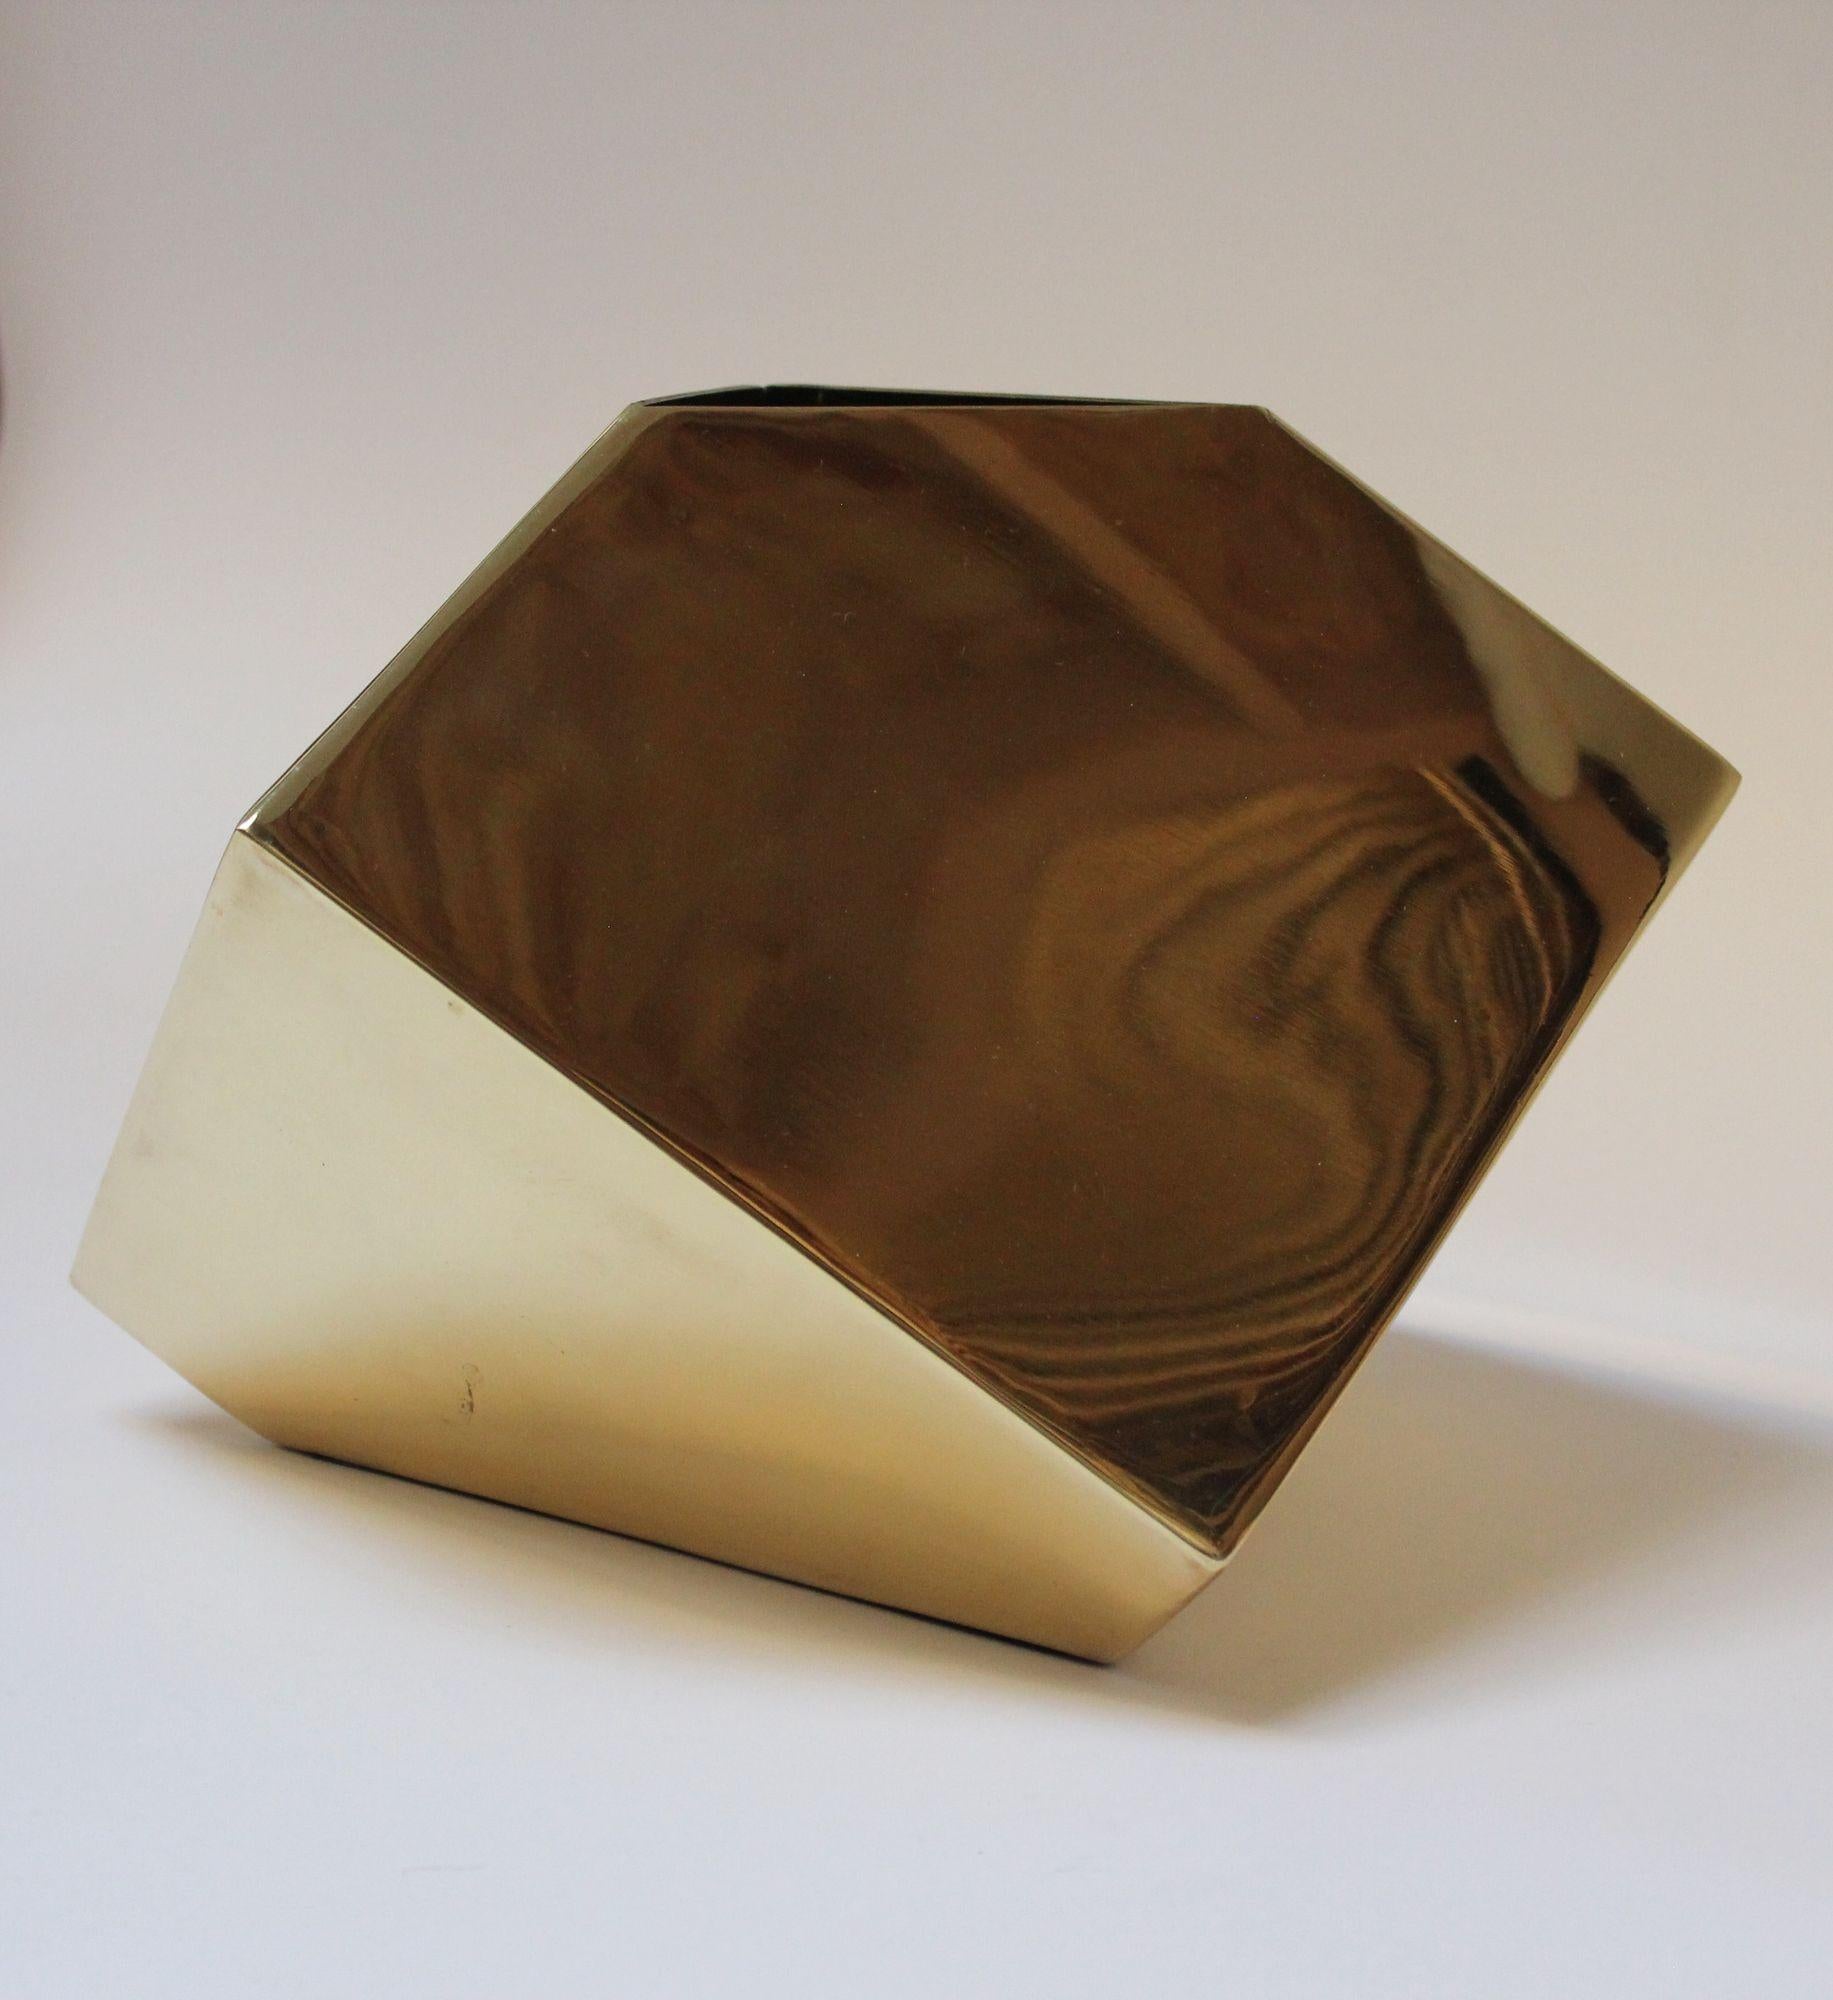 Taiwanese Post-Modernist Polished Brass Geometric Vase by James Johnston for Balos